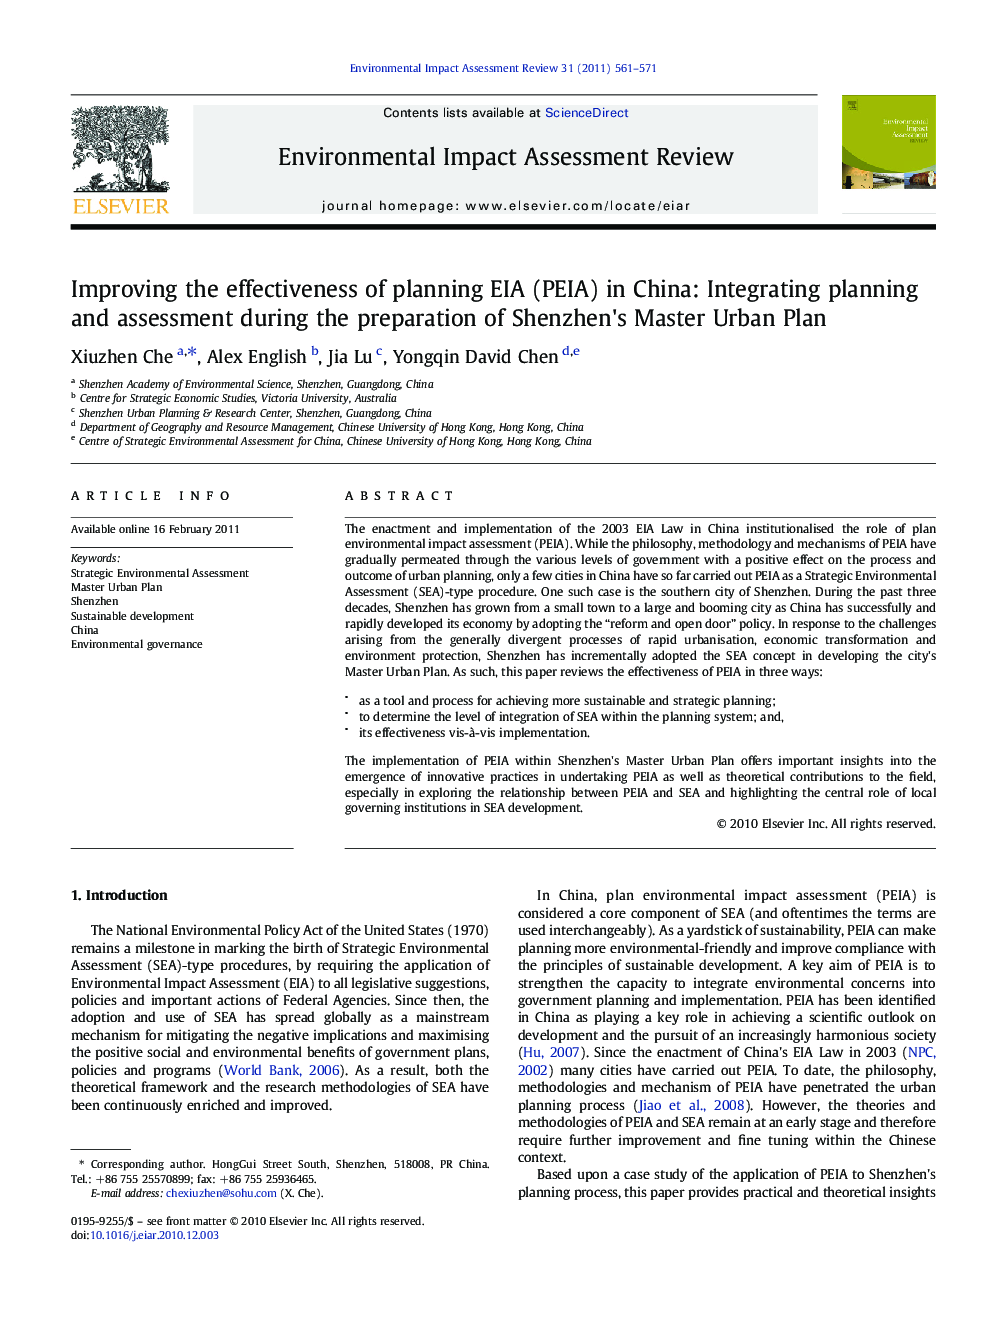 Improving the effectiveness of planning EIA (PEIA) in China: Integrating planning and assessment during the preparation of Shenzhen's Master Urban Plan